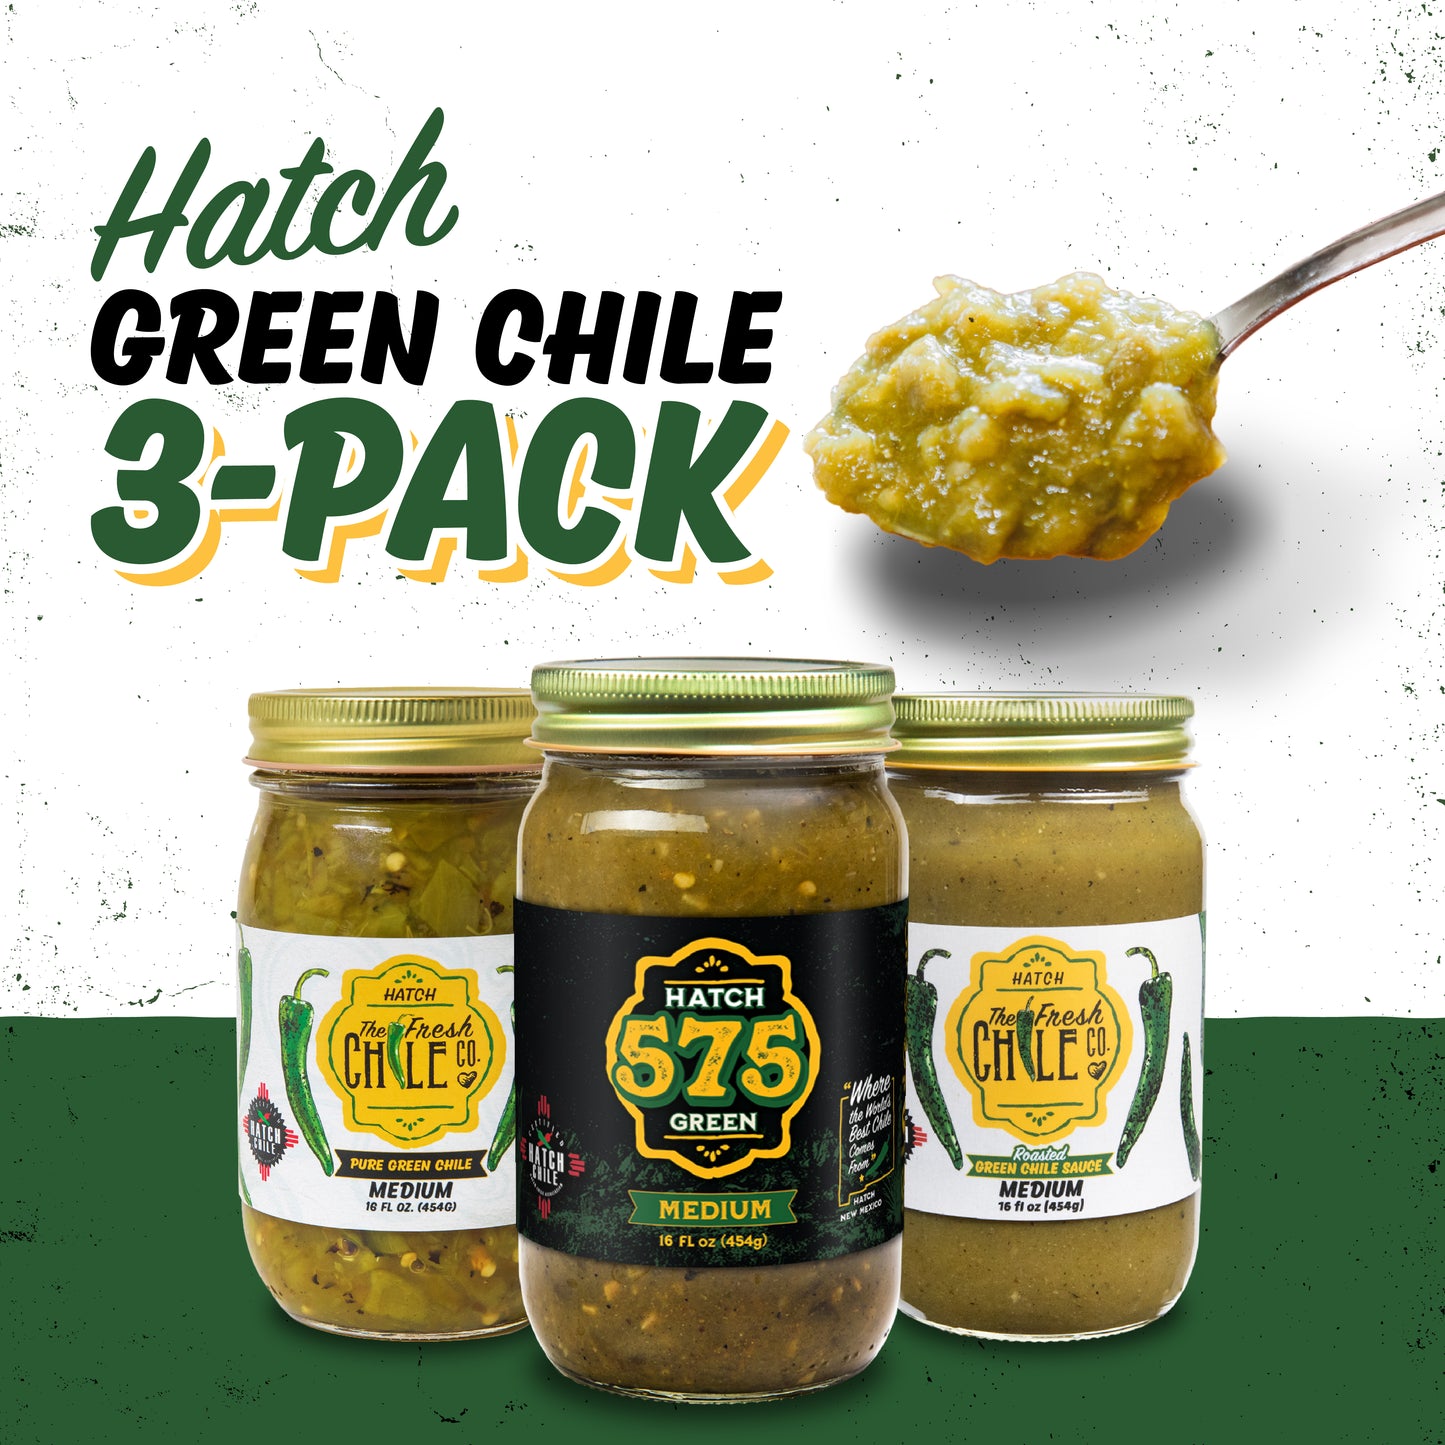 Hatch Green Chile - 3 Pack